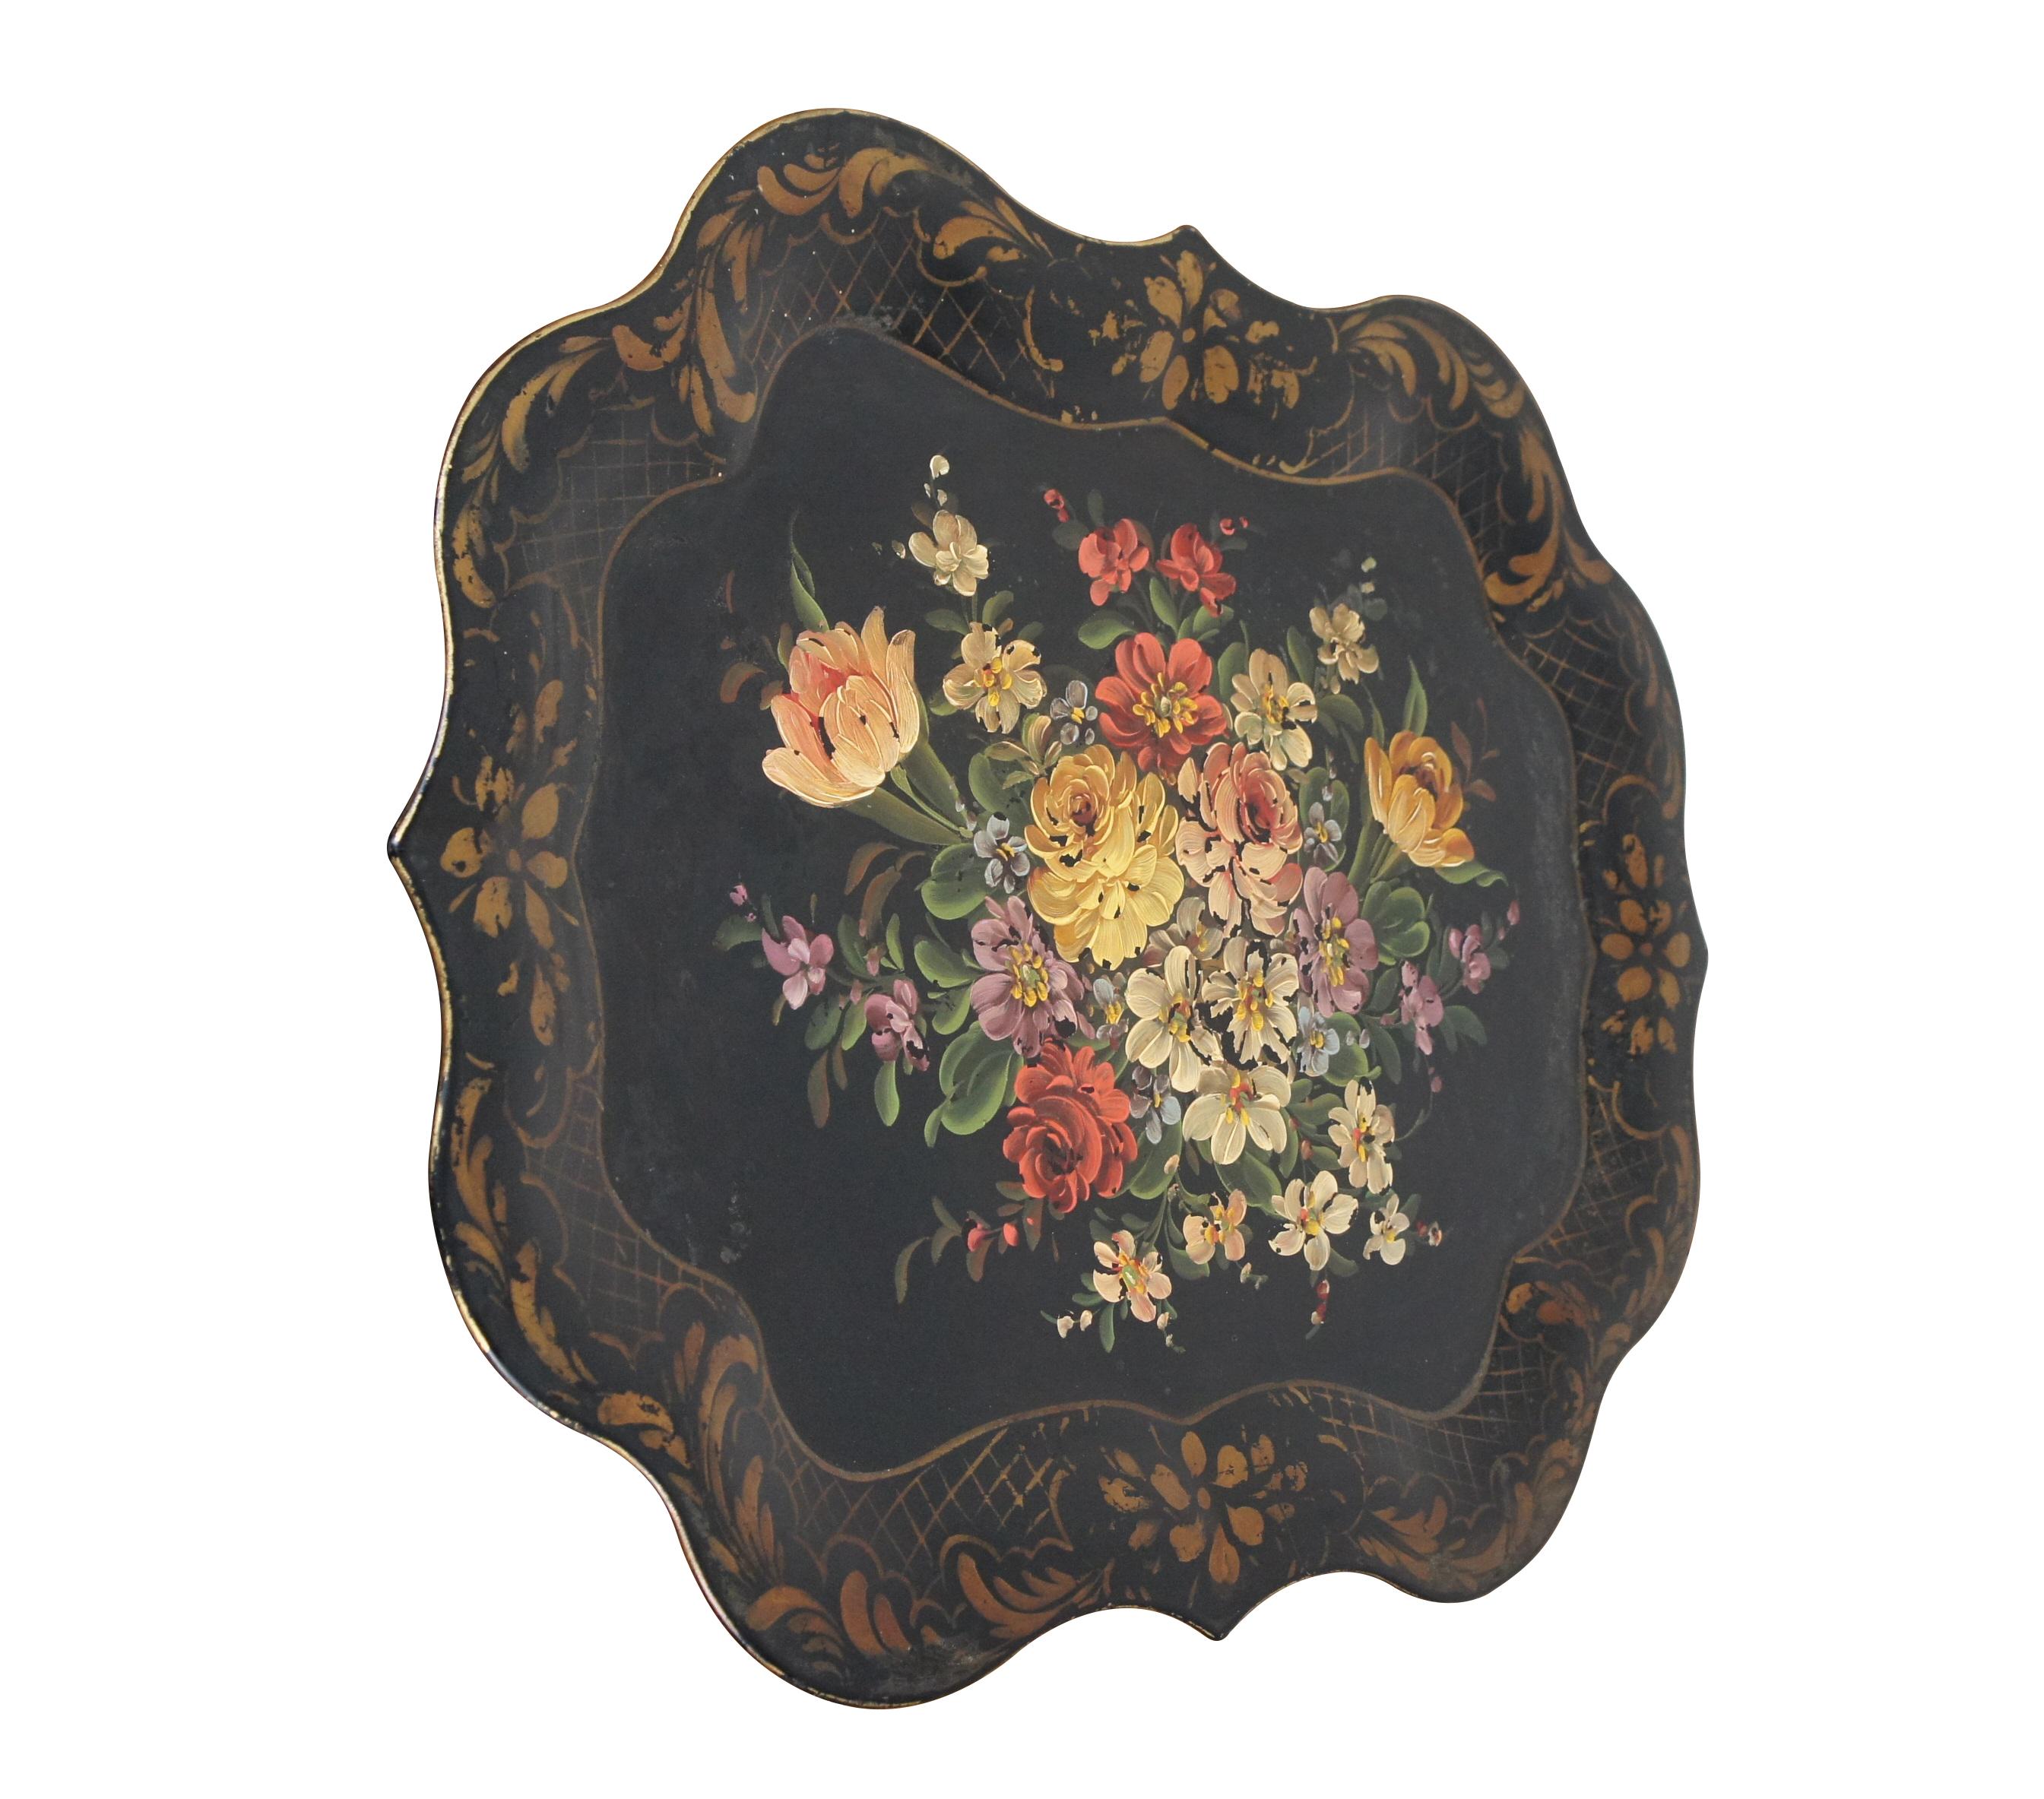 Early 20th century black metal tole serving tray with scalloped Chippendale style edge, hand painted with a pattern in gold around the border and a bouquet of flowers at the center.

Dimensions:
25